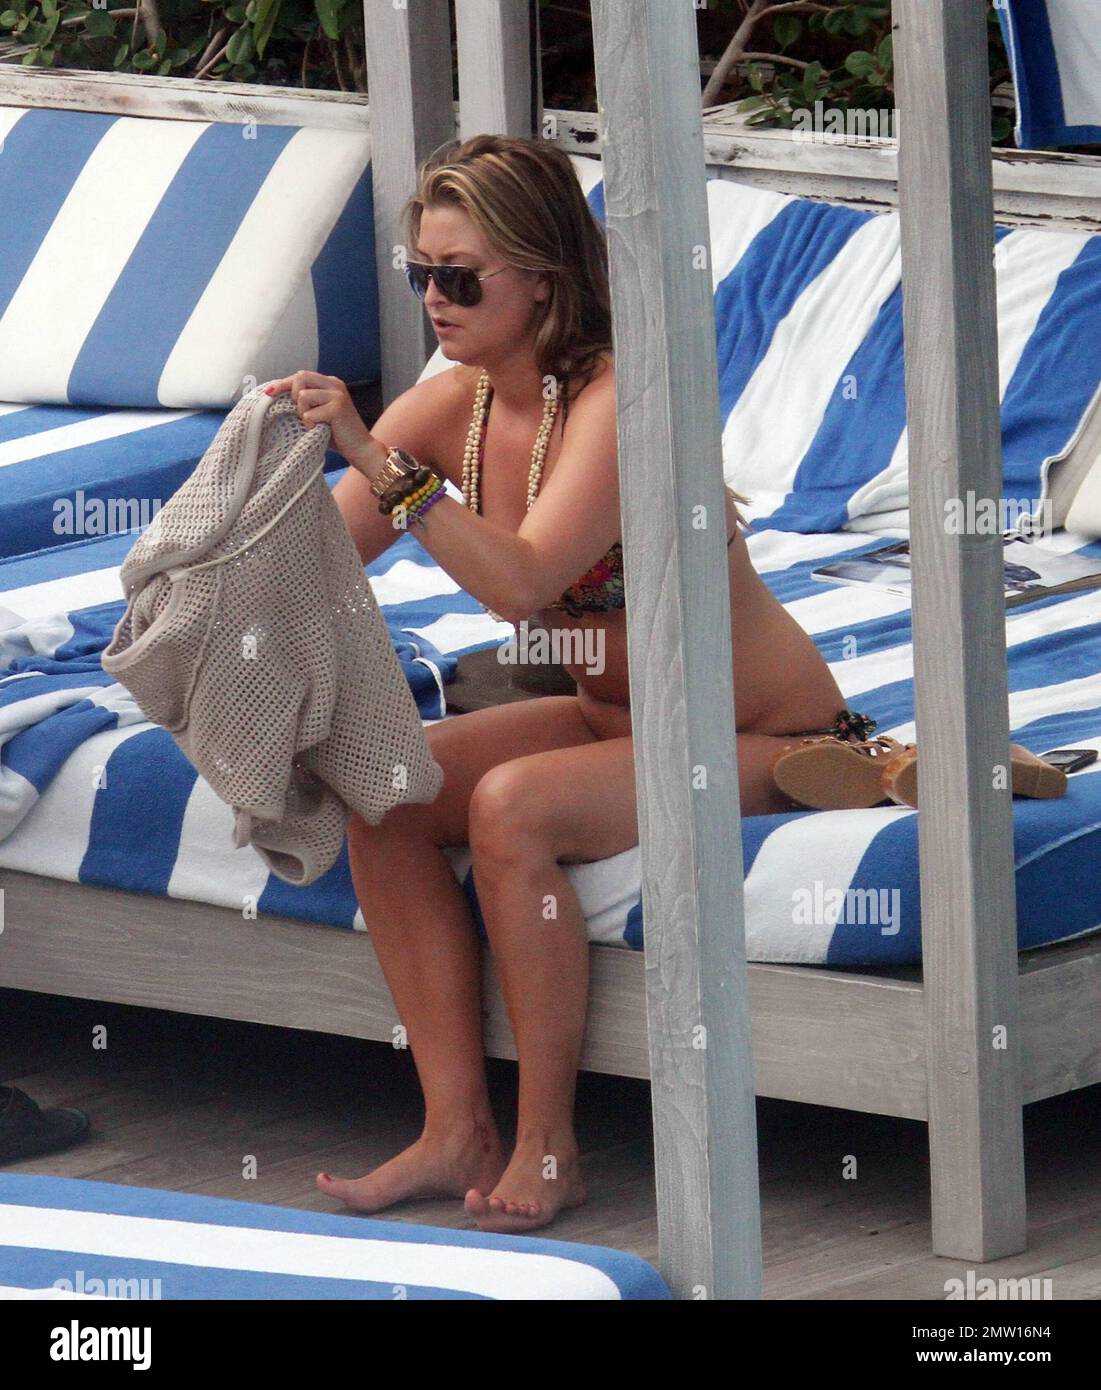 Australian actress and model, Holly Valance, shows off her famous curves in a colorful bikini as she lounged poolside with her boyfriend Nick Candy. The couple, who are suffering from jet lack after an early morning the previous day to watch the Royal Wedding, relaxed in the sun, sipped cold drinks and read magazines. Miami Beach, FL. 4/30/11. Stock Photo